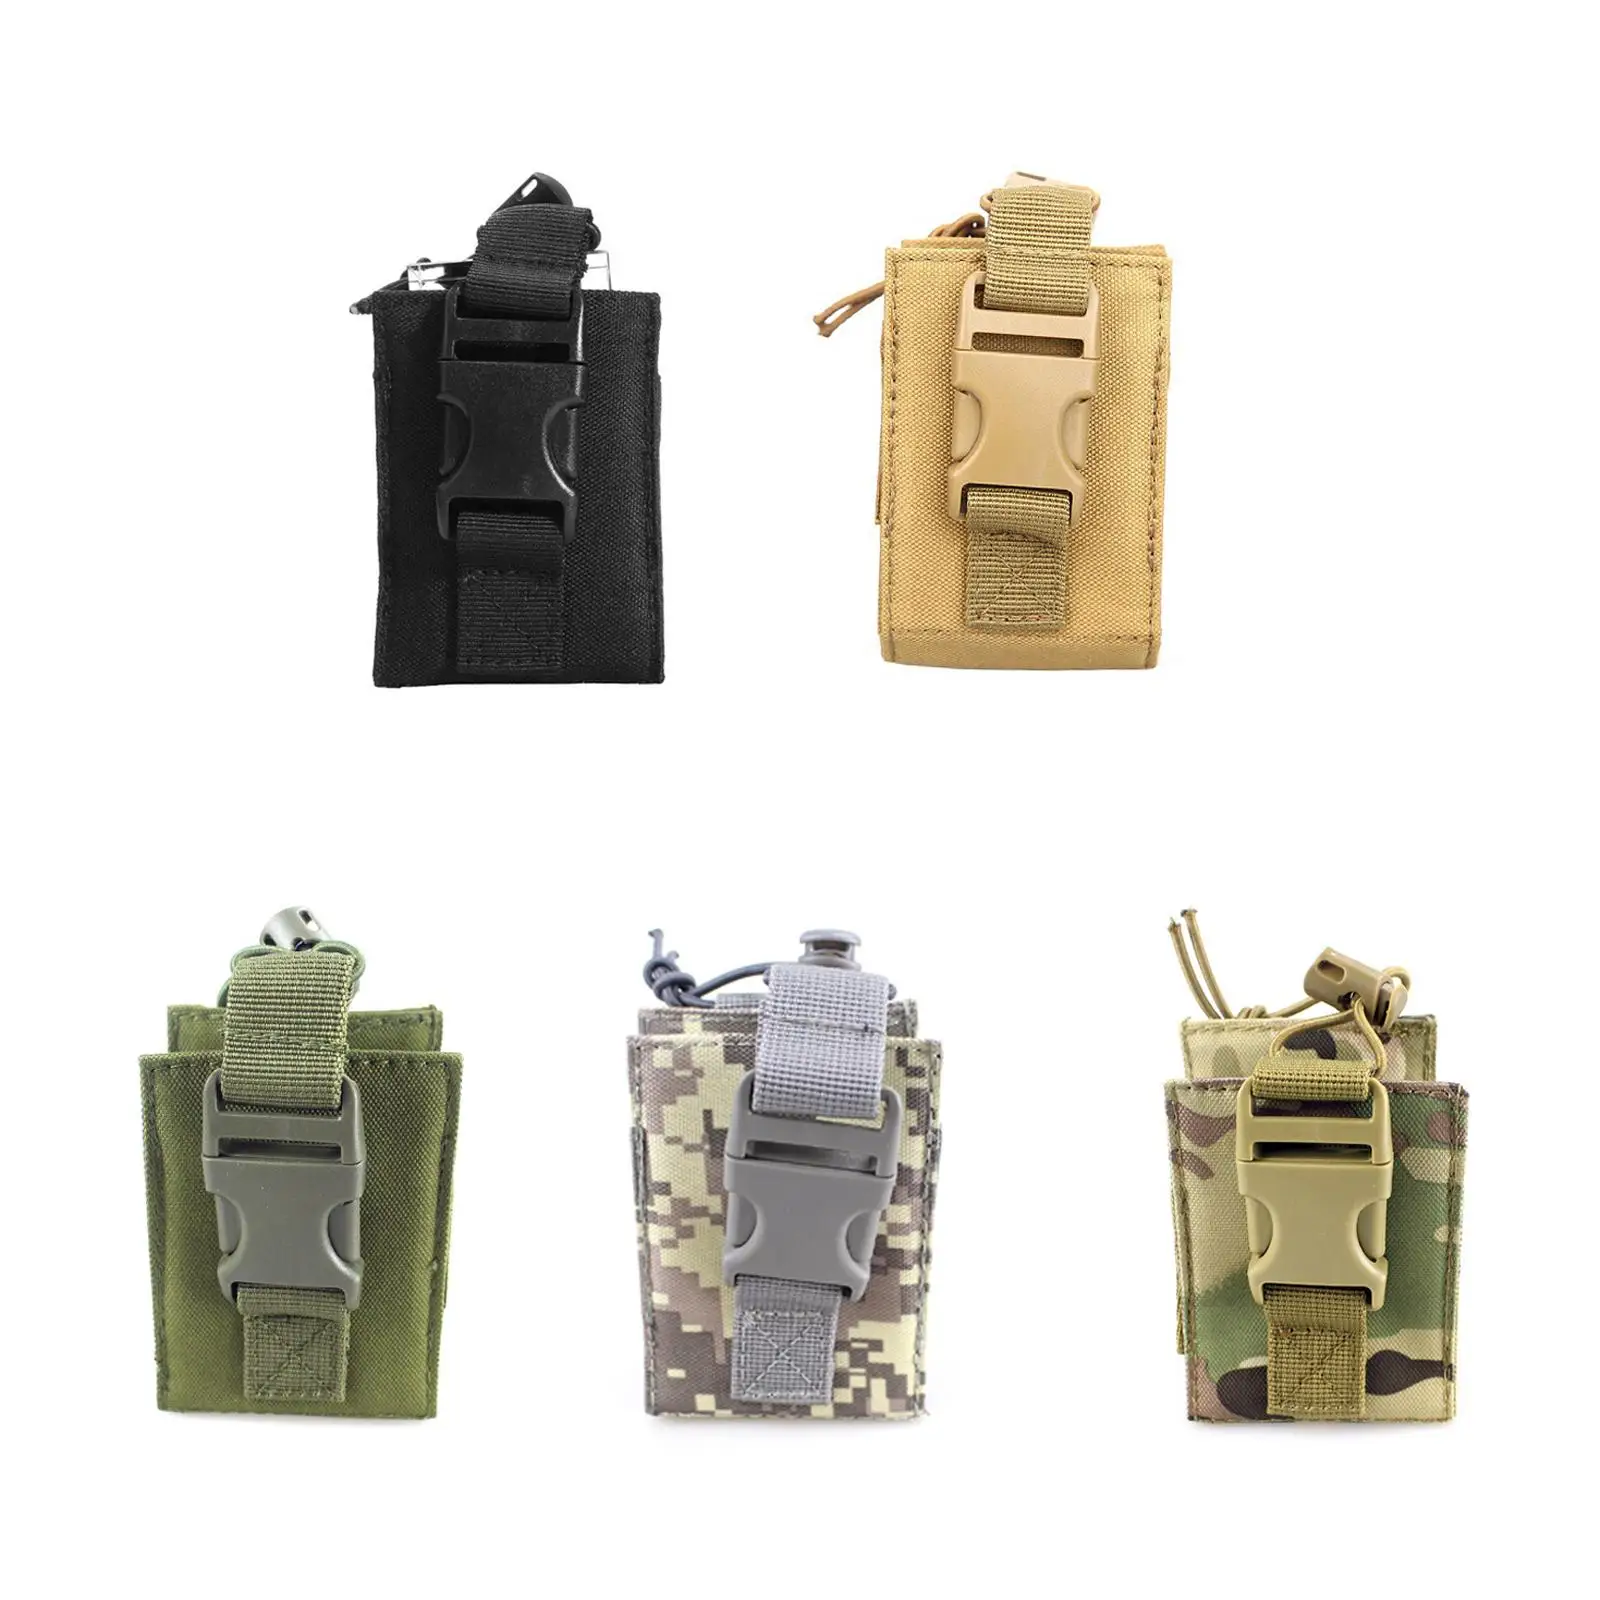 1x Radio Pouch Holder Multifunction Carrying Case Nylon Portable for Camping